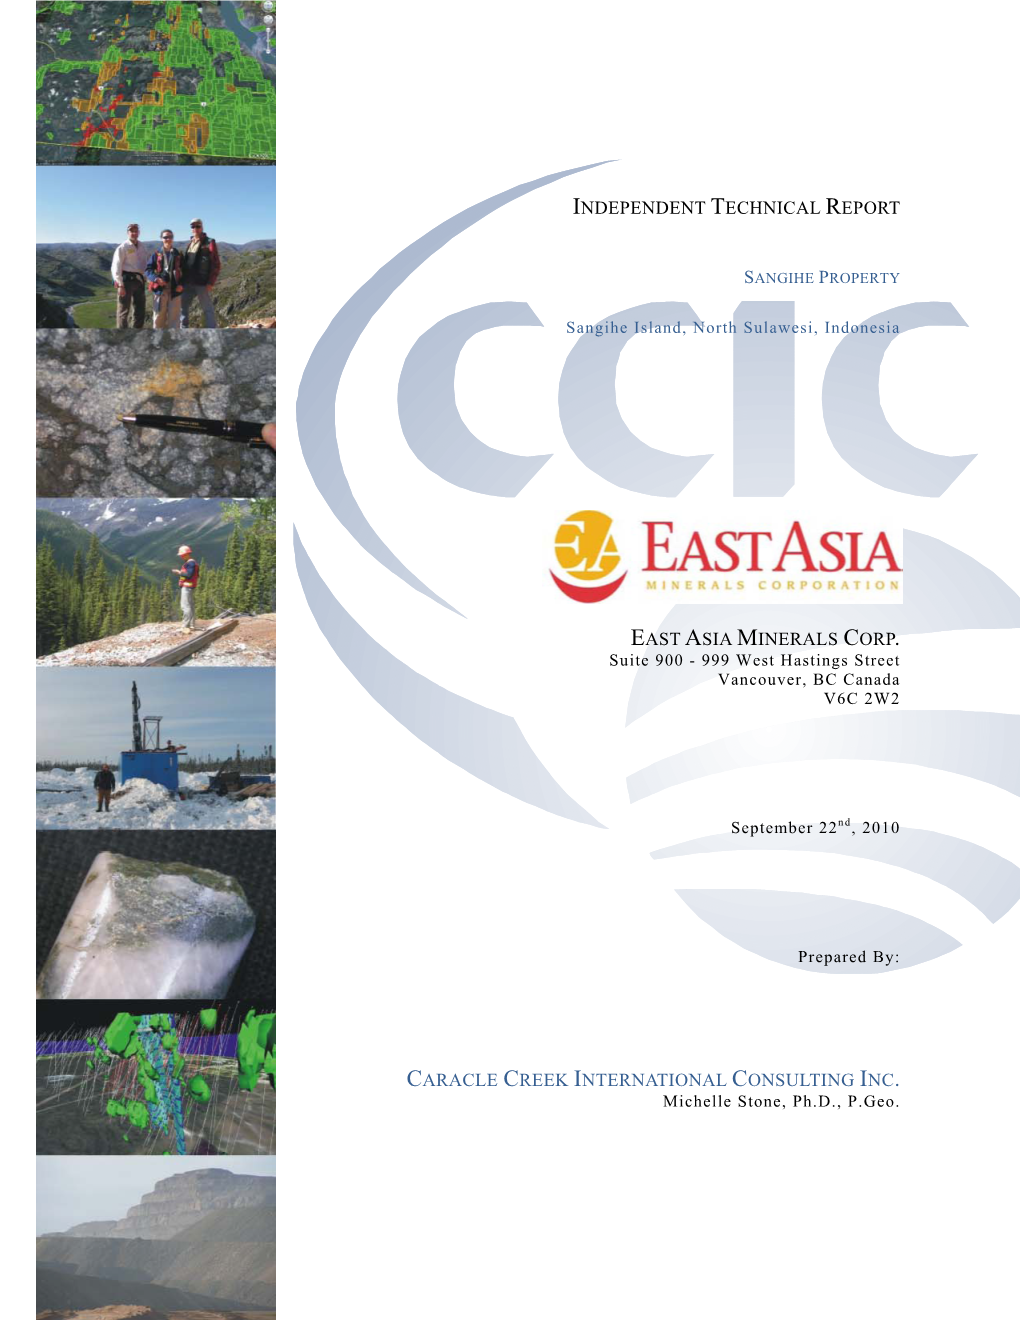 Independent Technical Report East Asia Minerals Corp. Caracle Creek International Consulting Inc